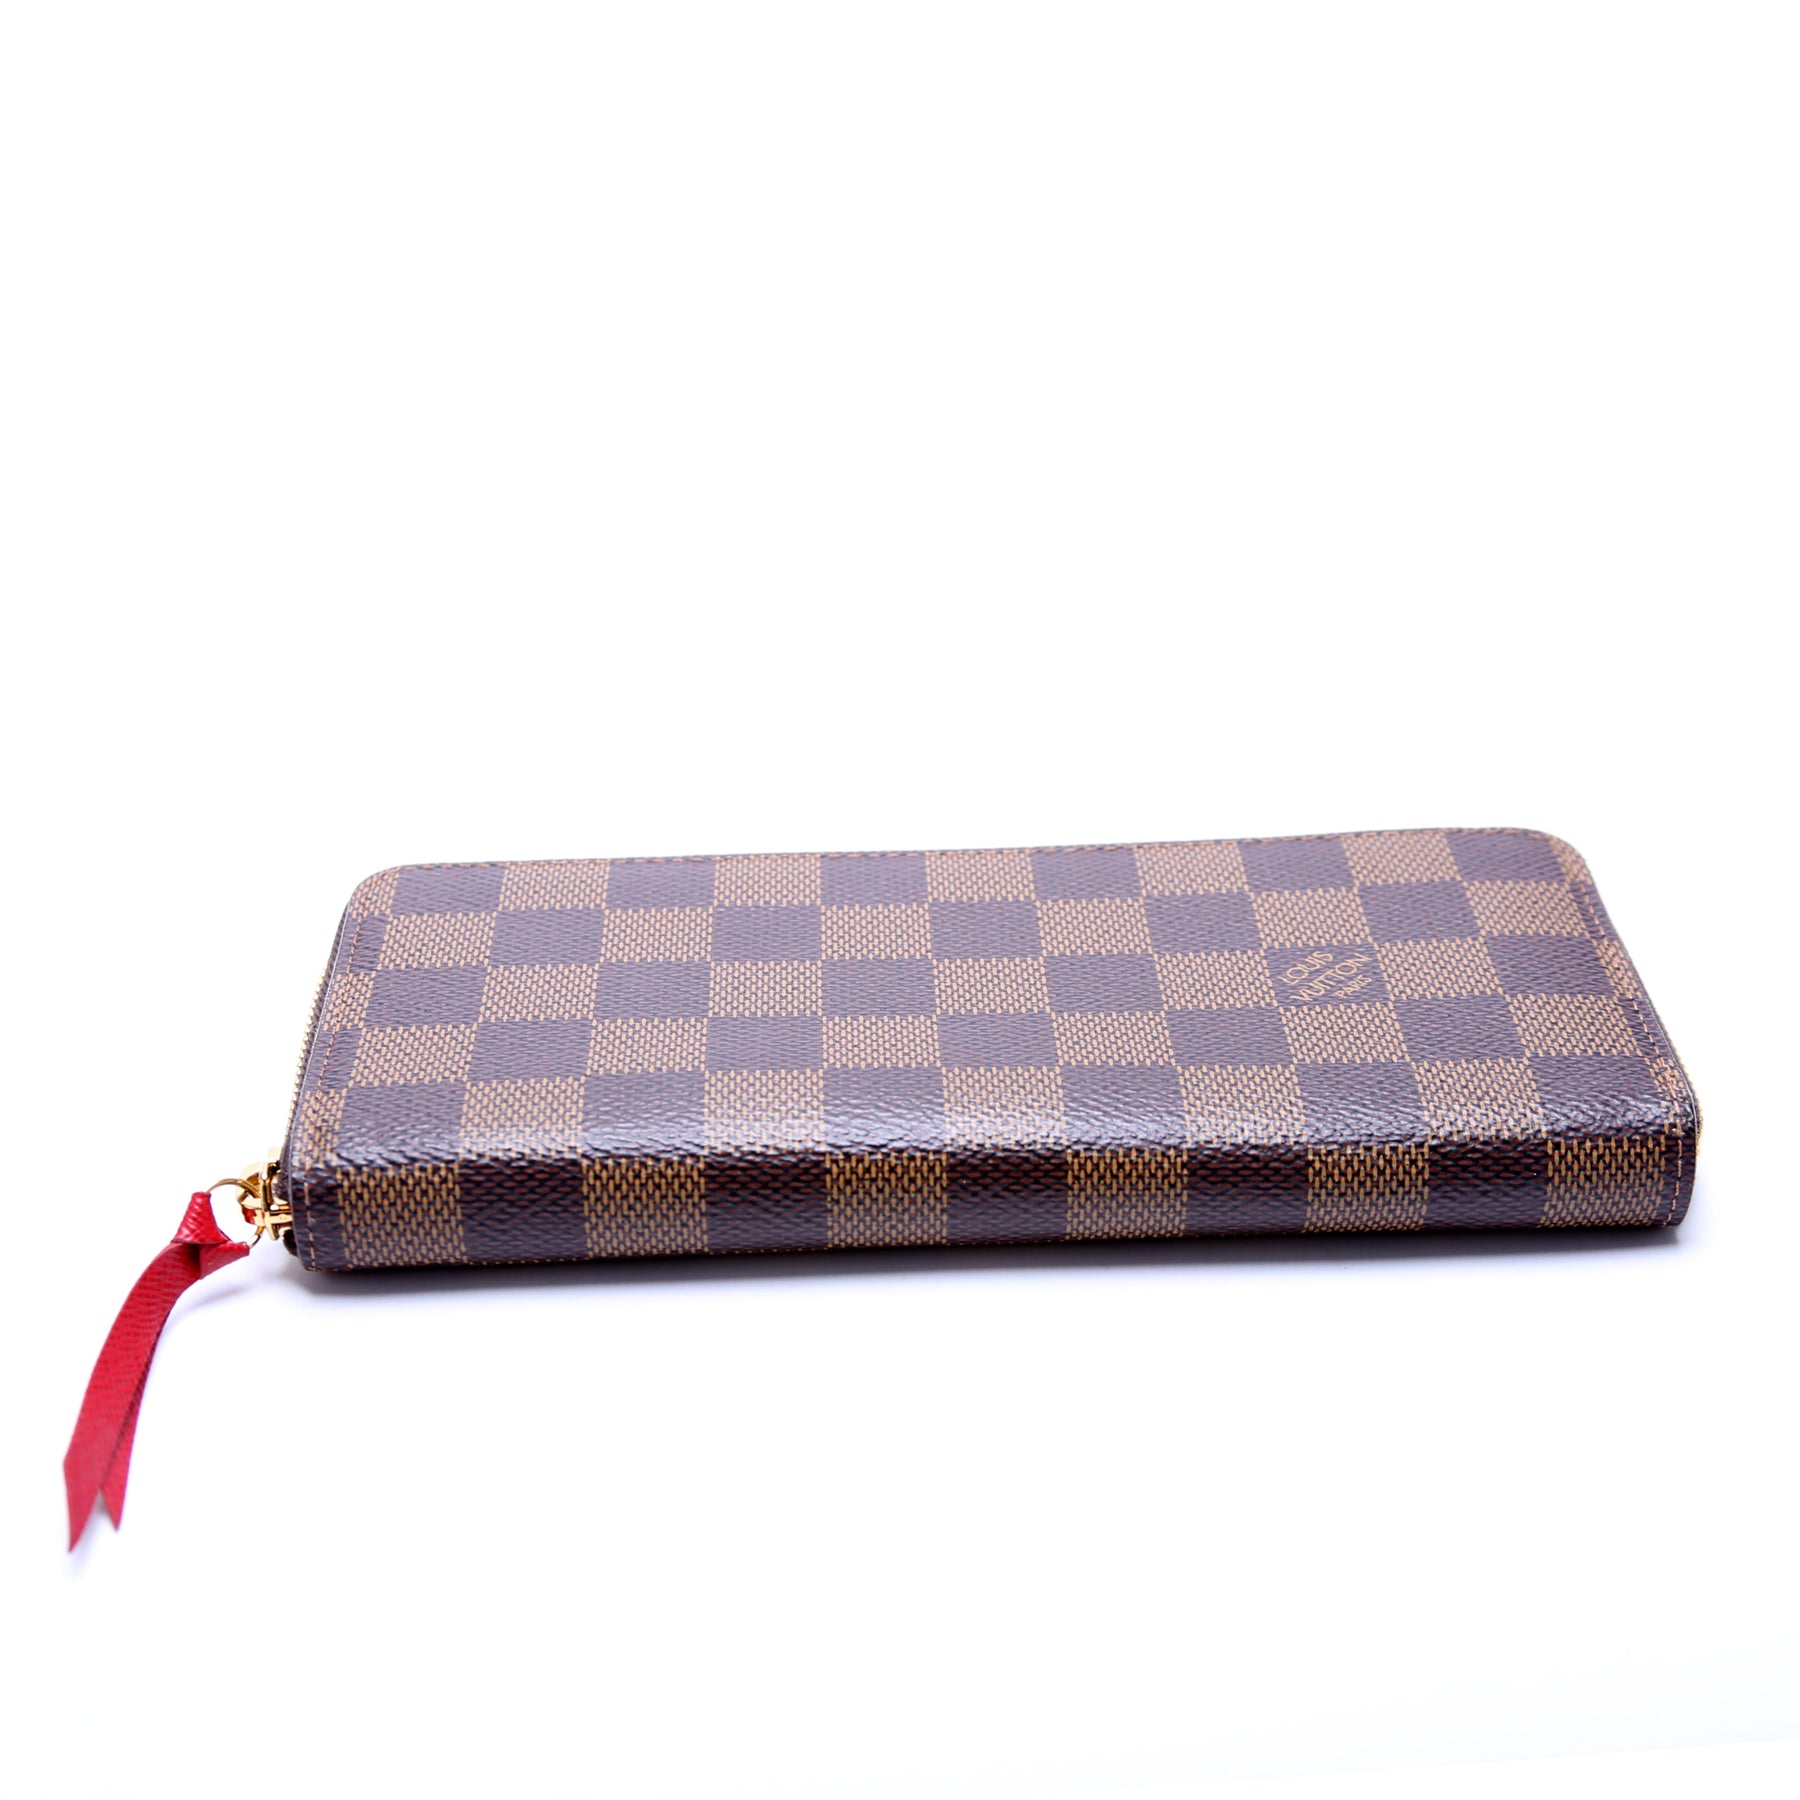 Louis Vuitton - Clemence Wallet - Damier Ebene - GHW - Immaculate